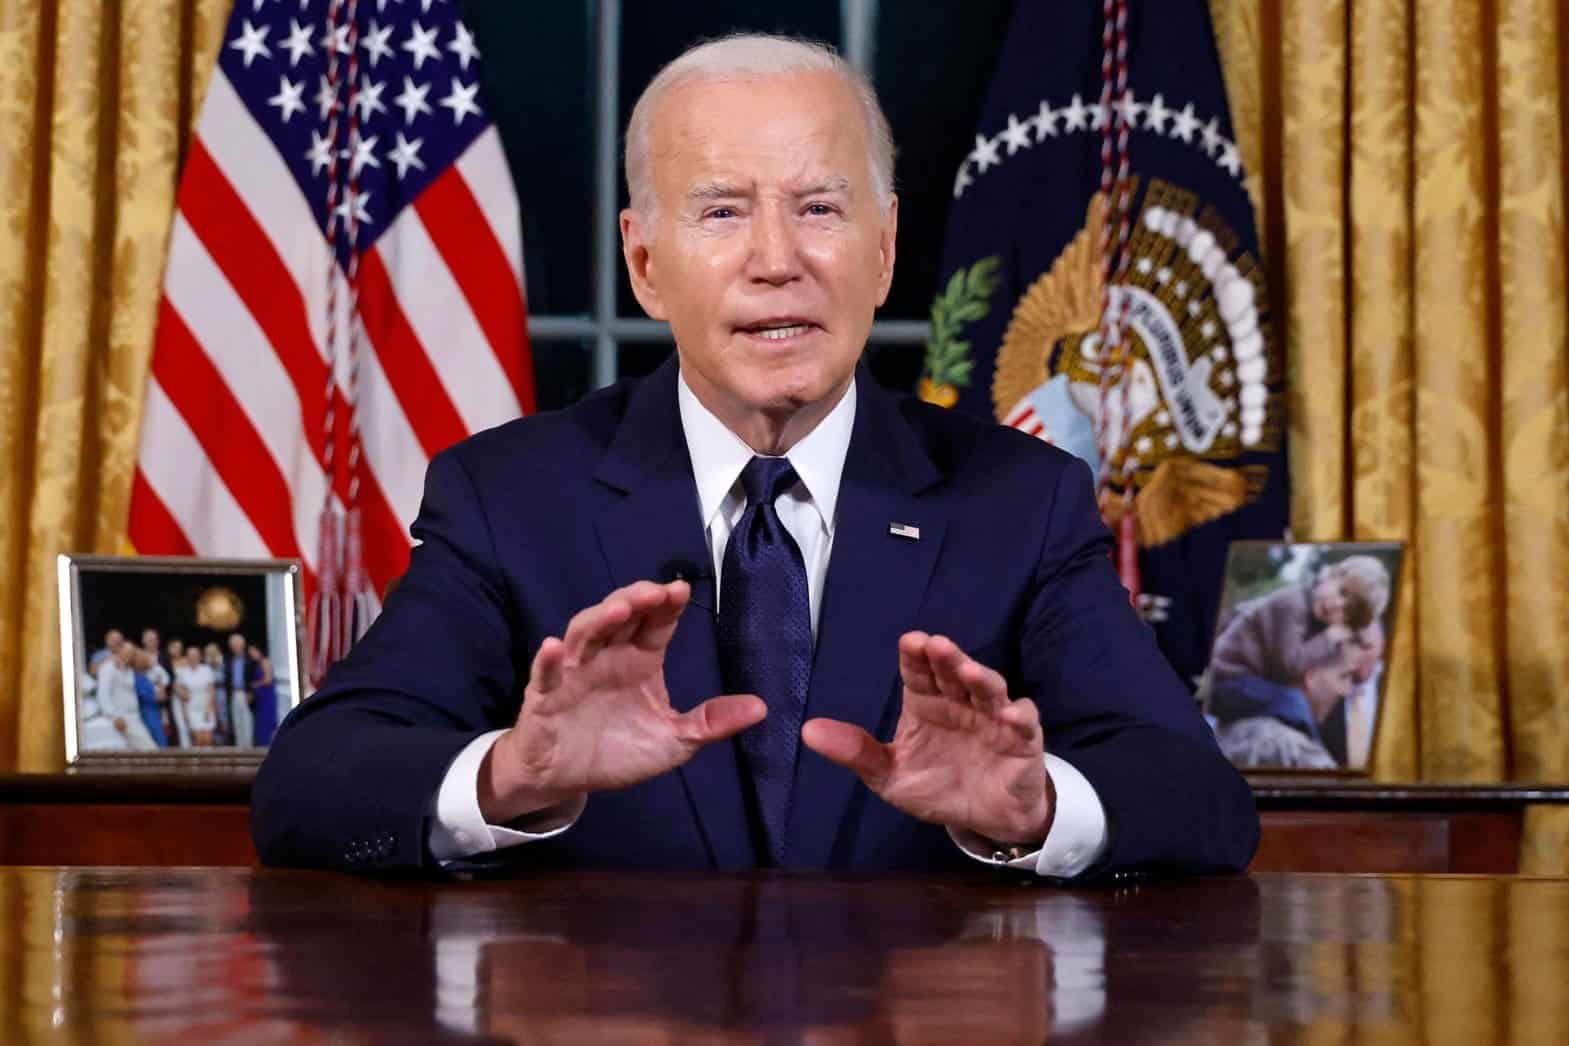 National survey: Biden has a Latino problem | Commentary